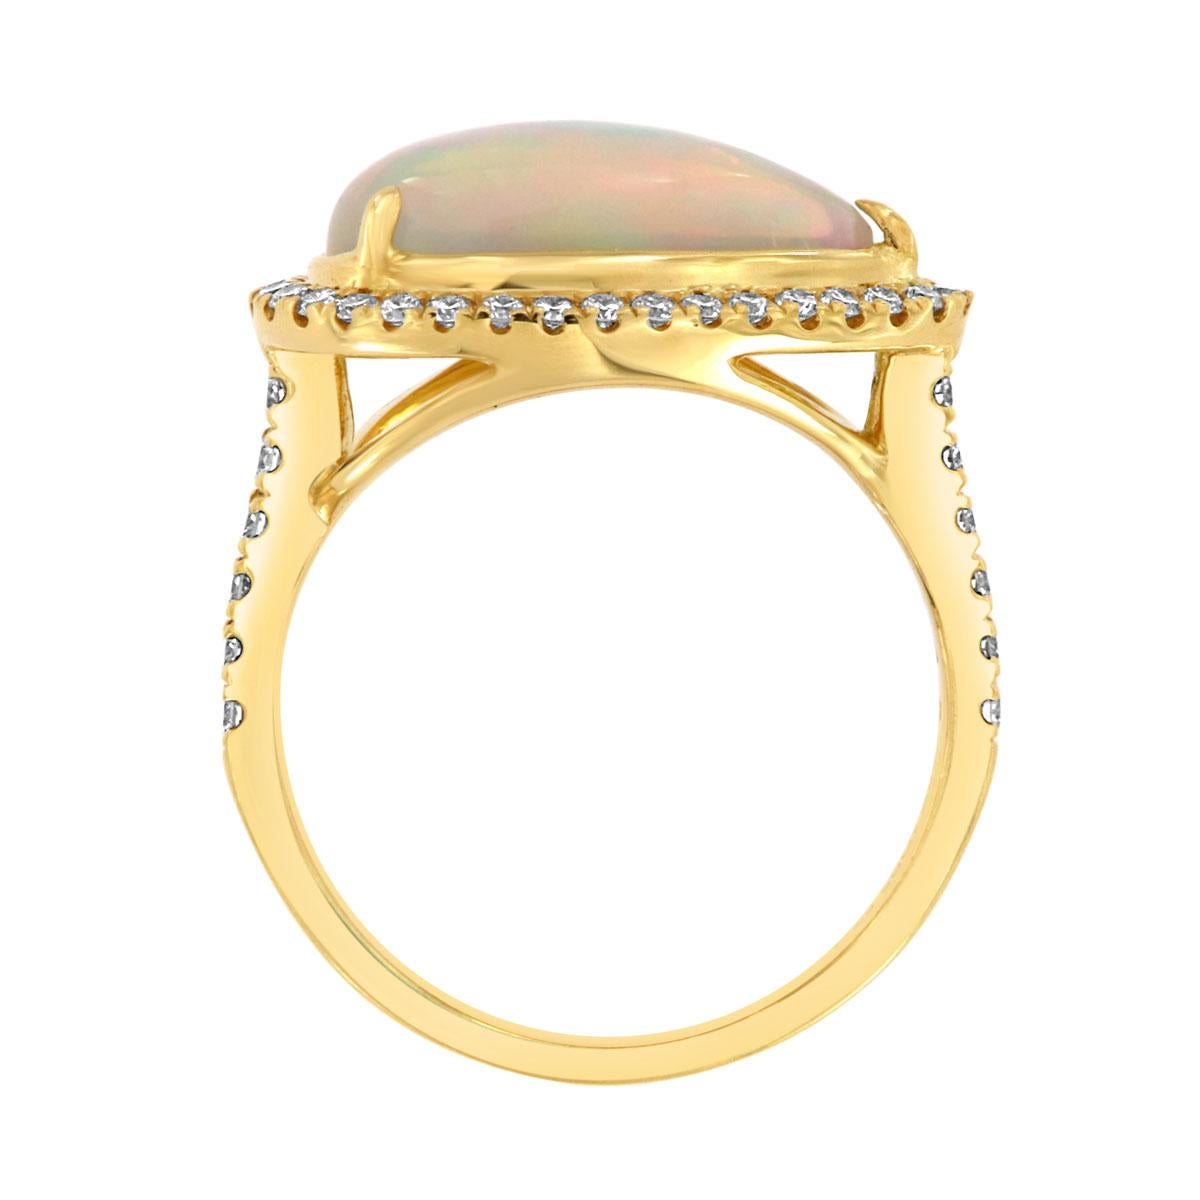 This colorful opal and diamond ring features an oval opal framed by Micro prong round brilliant diamonds in 18k yellow gold. Experience the Difference!

Product details: 

Center Gemstone Type: Opal
Center Gemstone Carat Weight: 2.57
Center Gemstone